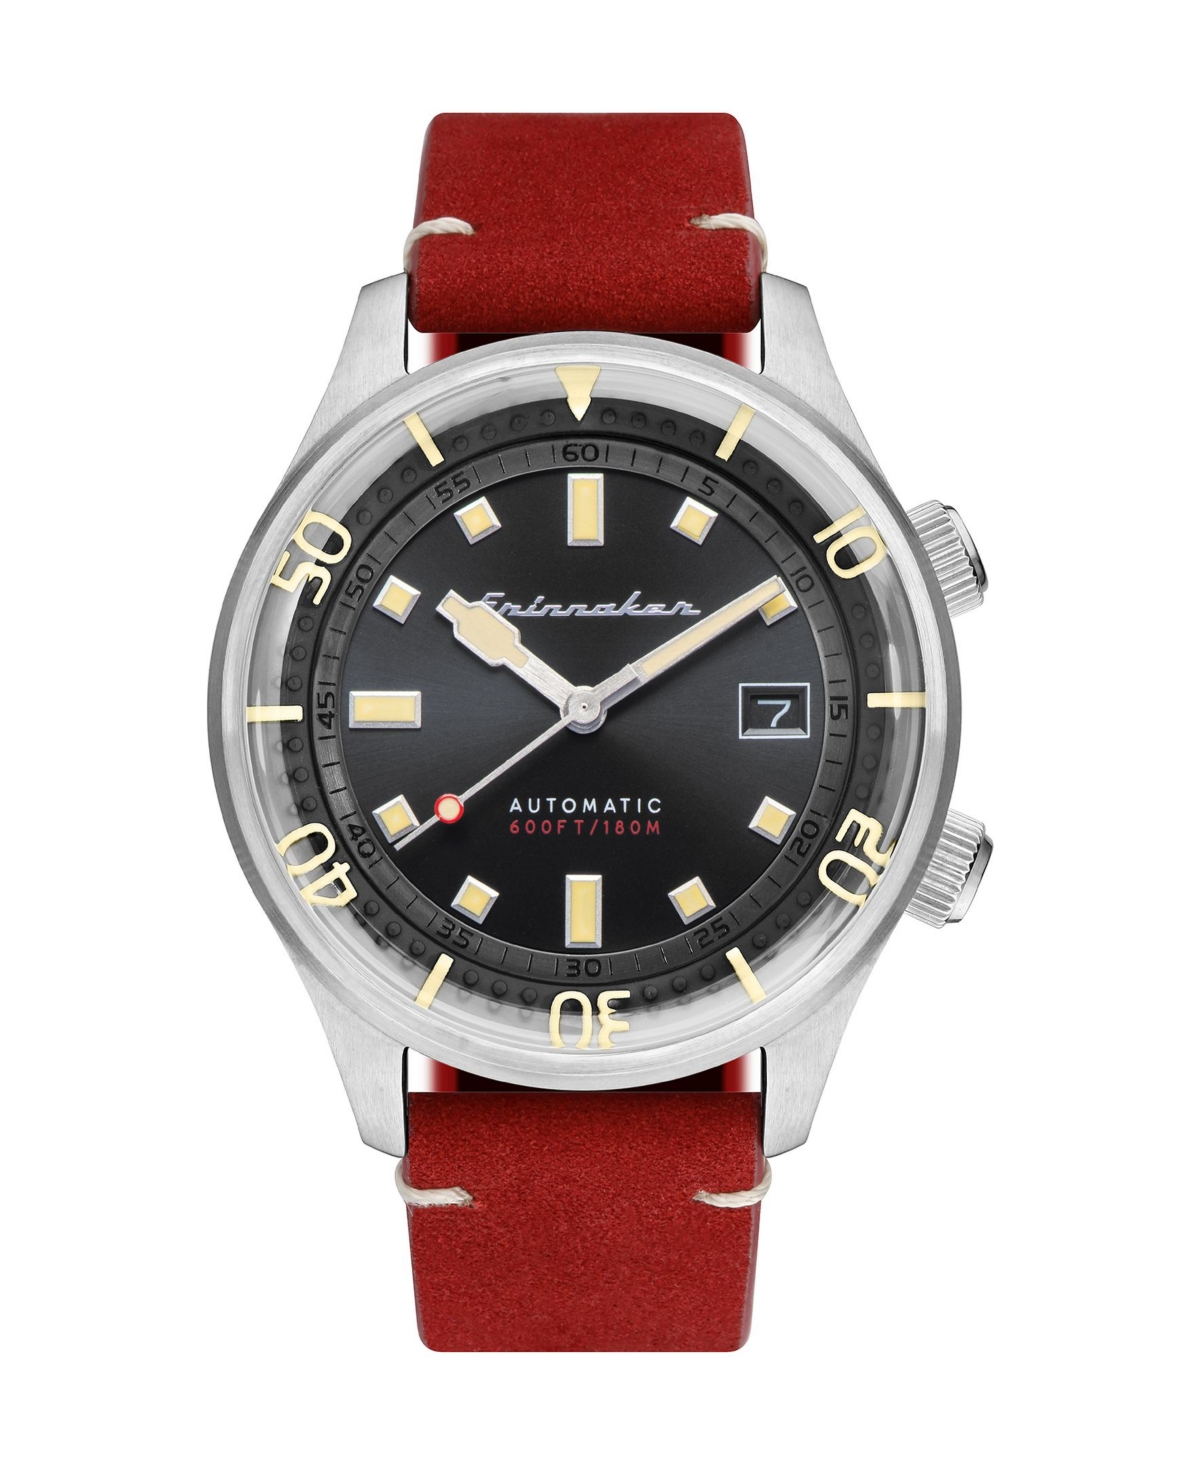 Men's Bradner Automatic Red Genuine Leather Strap Watch 42mm - Red